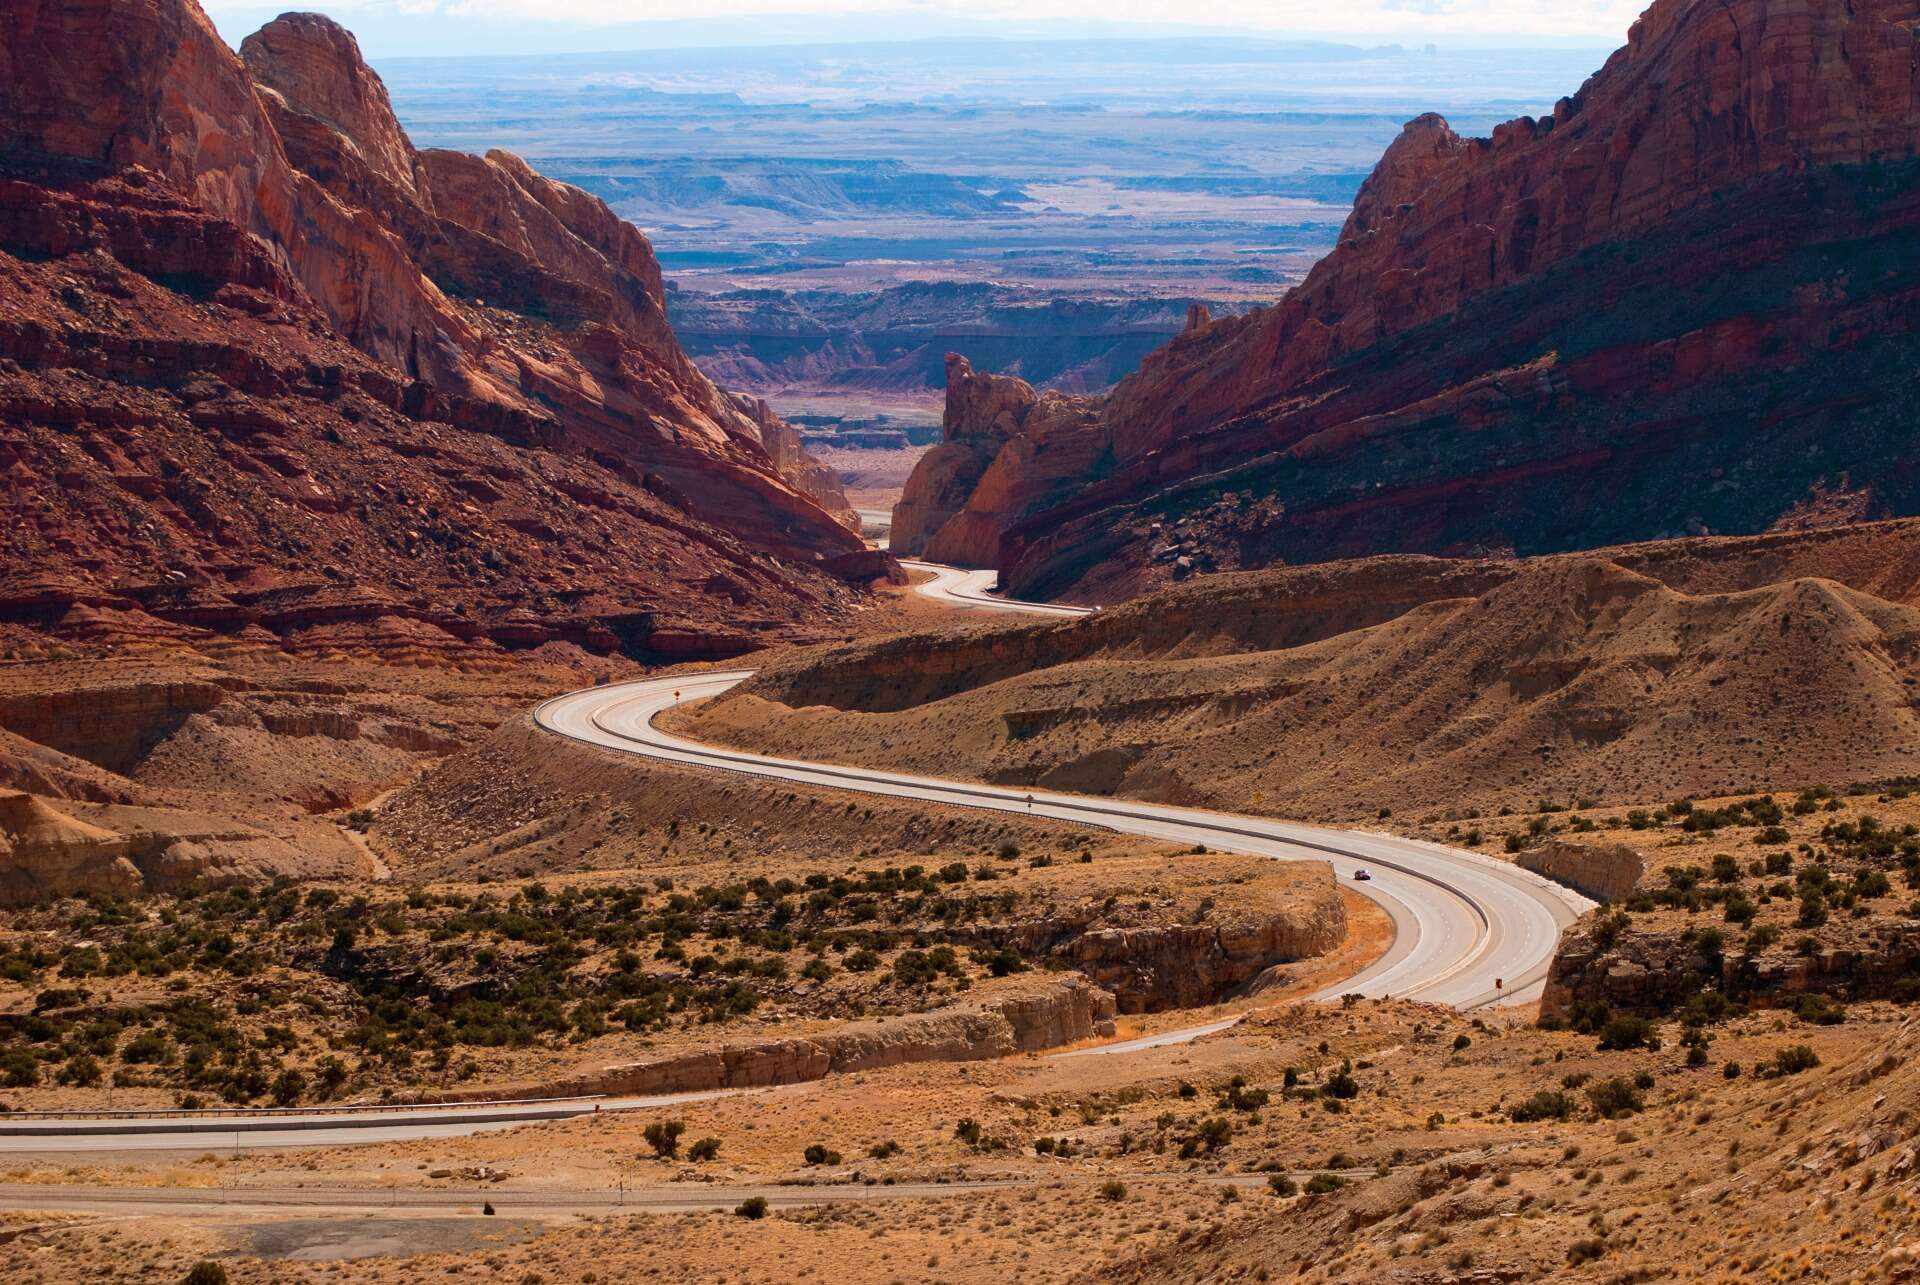 Discover America’s Hidden Gems on These Luxury Road Trips